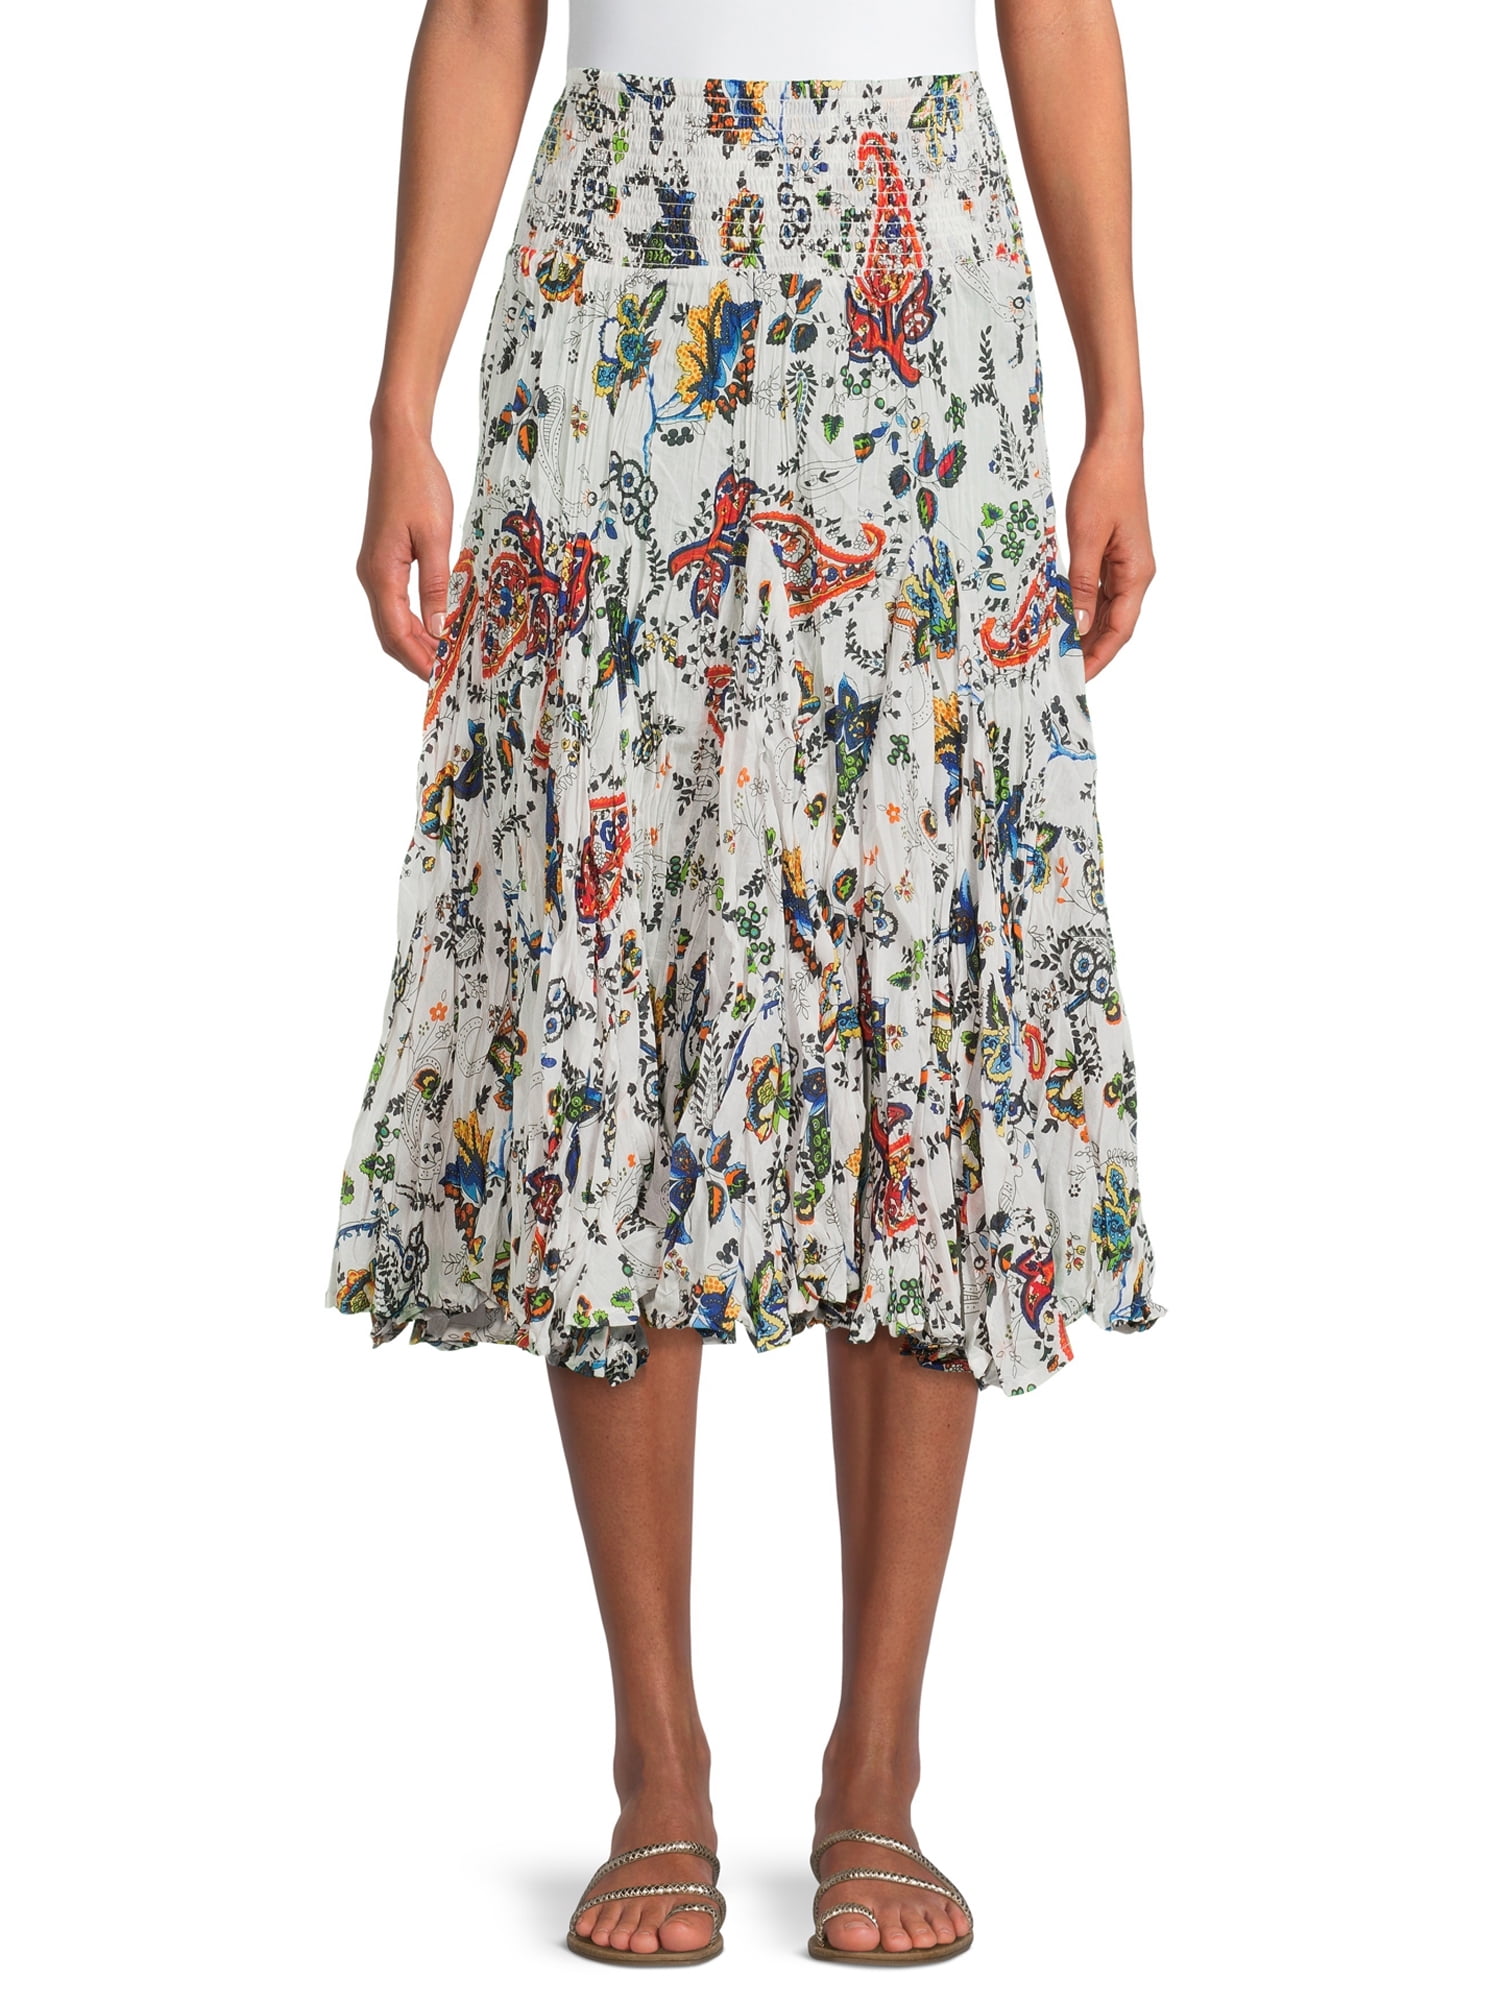 Plus Missy Le Mieux Casual Navy/White Floral Cotton Broomstick Skirt 